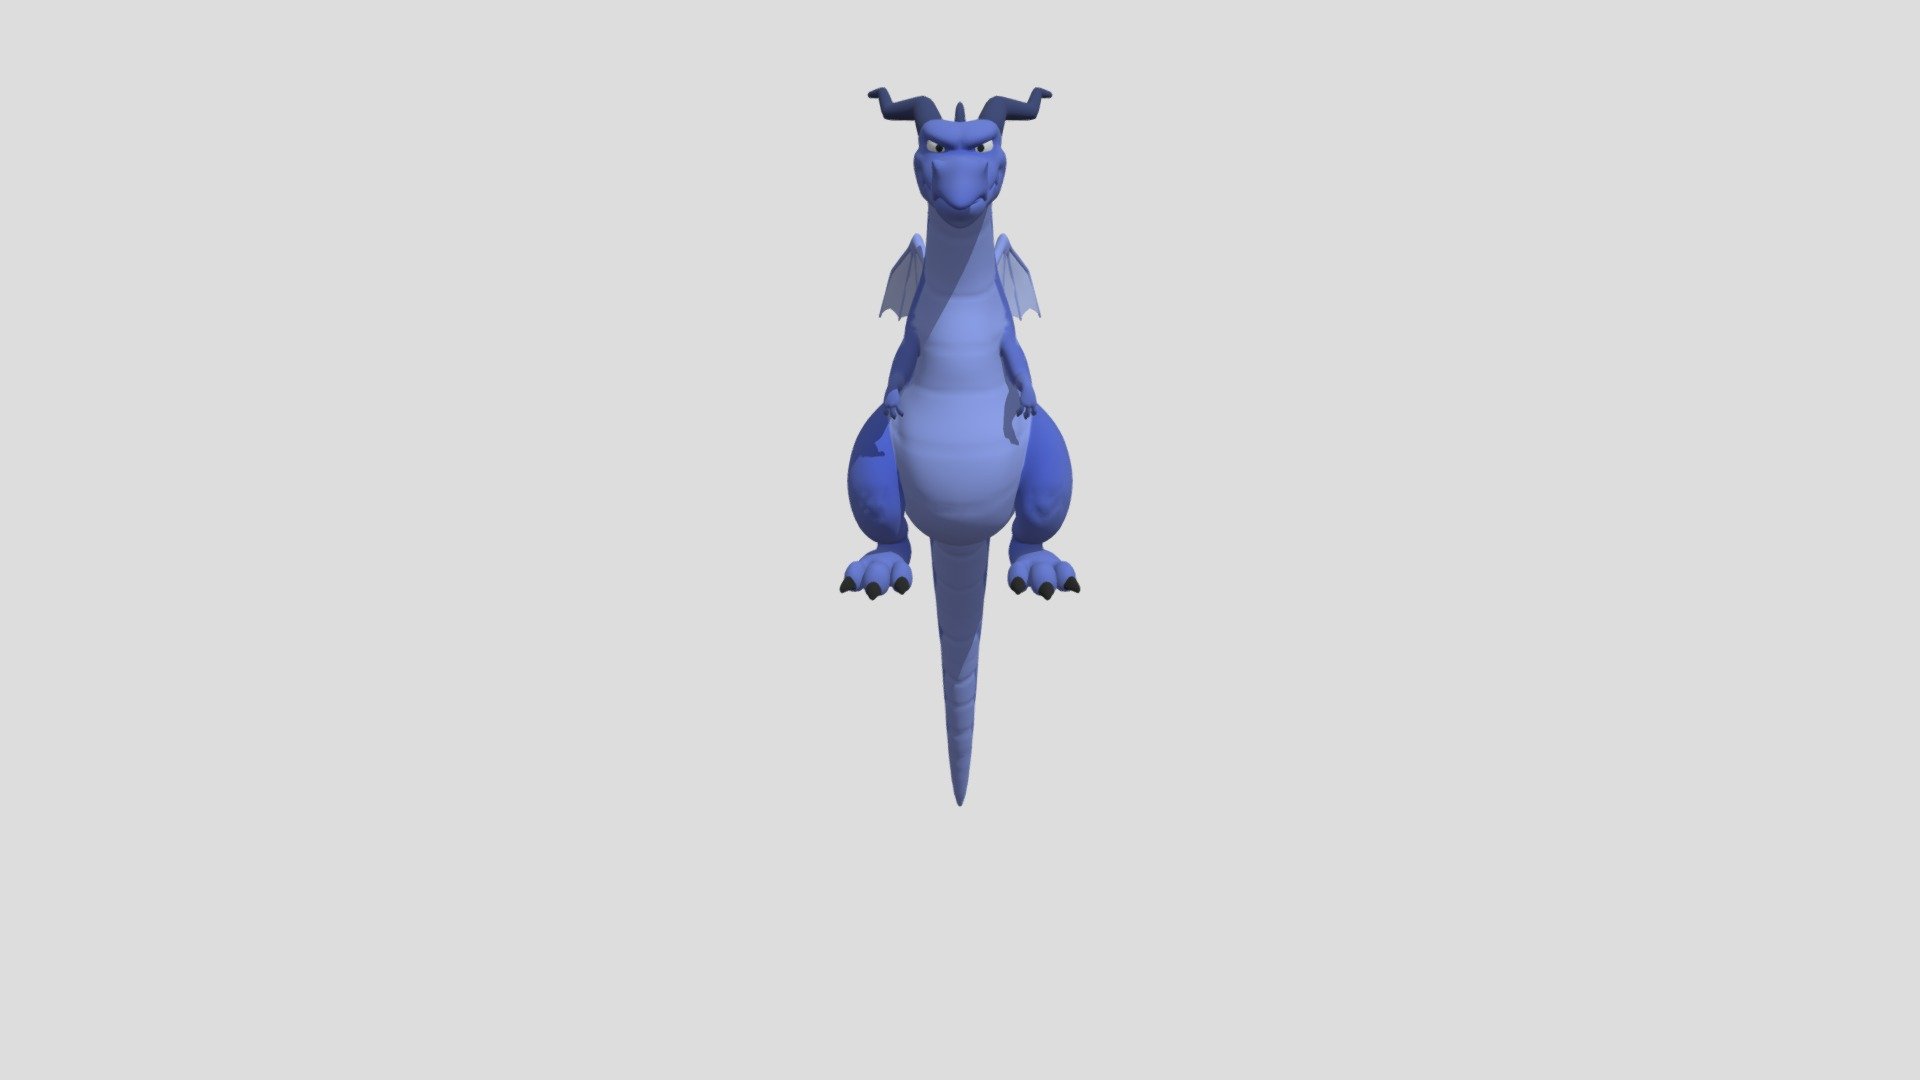 Stylized Dragon!

High quality model of a stylized  Dragon. A cute  character for your projects.

Please leave a comment or a like when you liked this model and downloaded it.

Thanks, and have fun! - Drakon Stylized (Game ready) - 3D model by irisboyev99 3d model